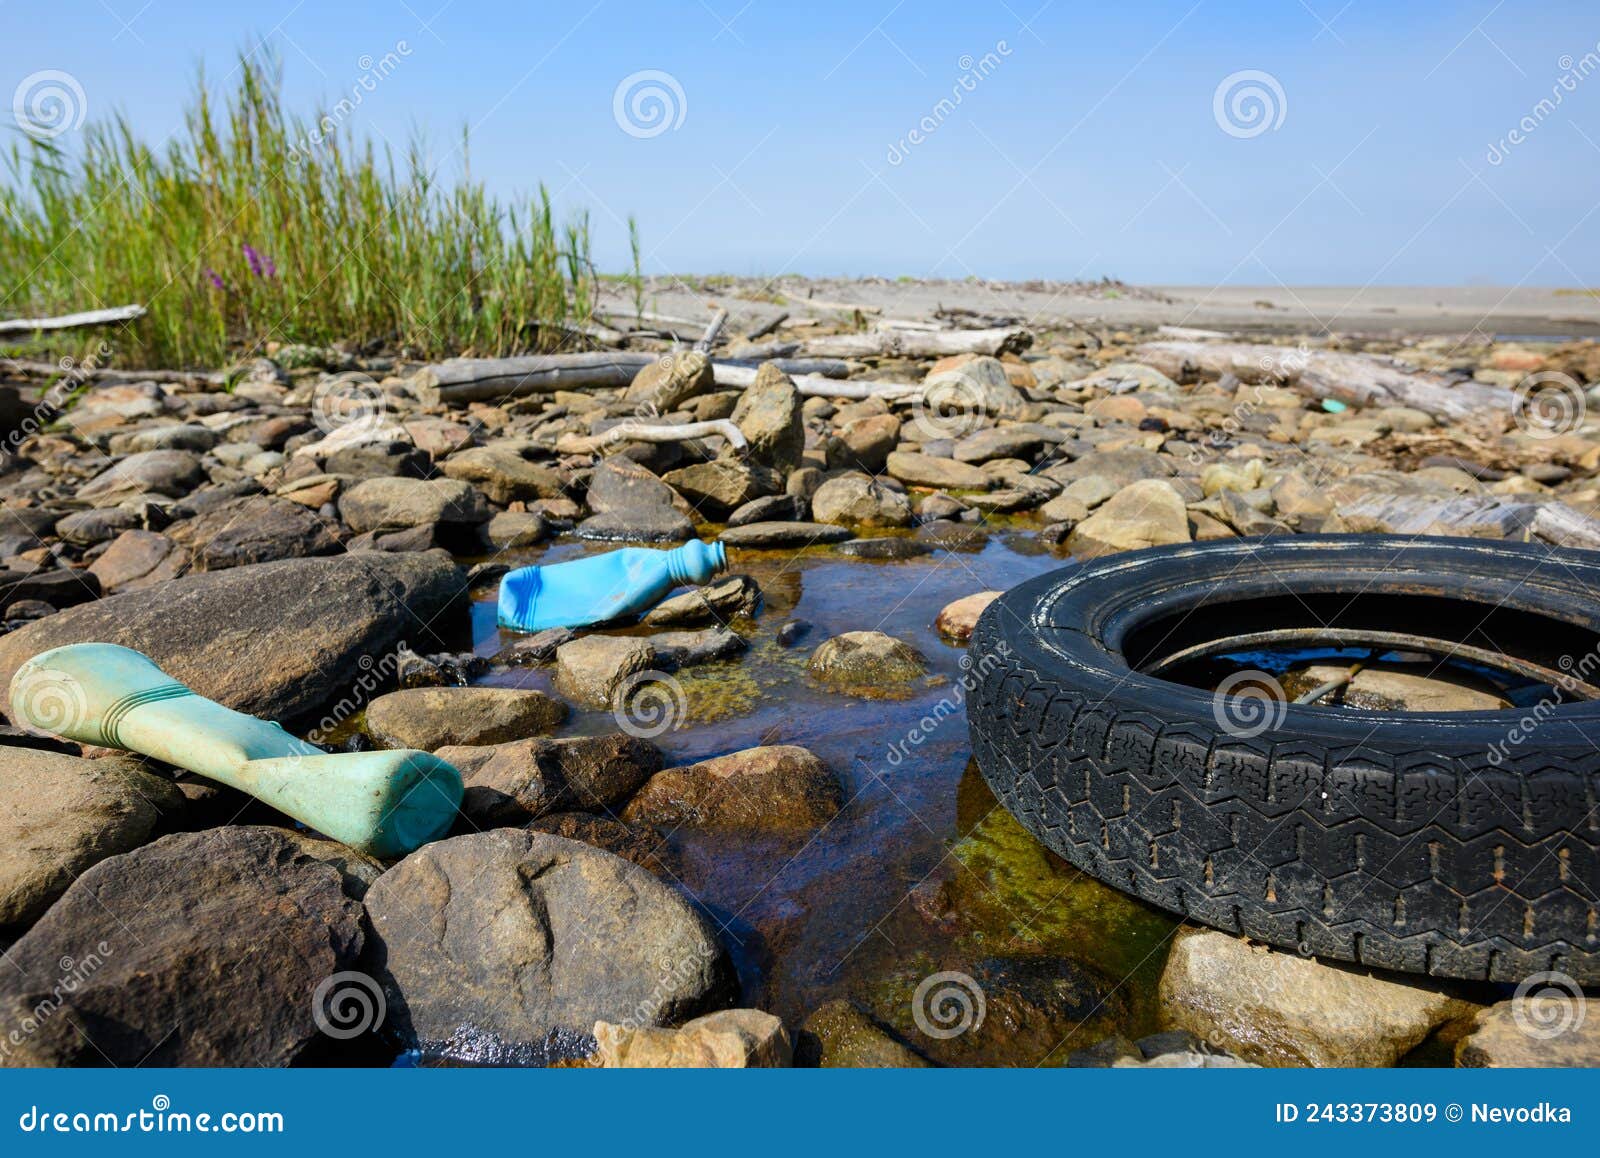 Car Tire and Plastic Bottles in Muddy Puddle on Beach